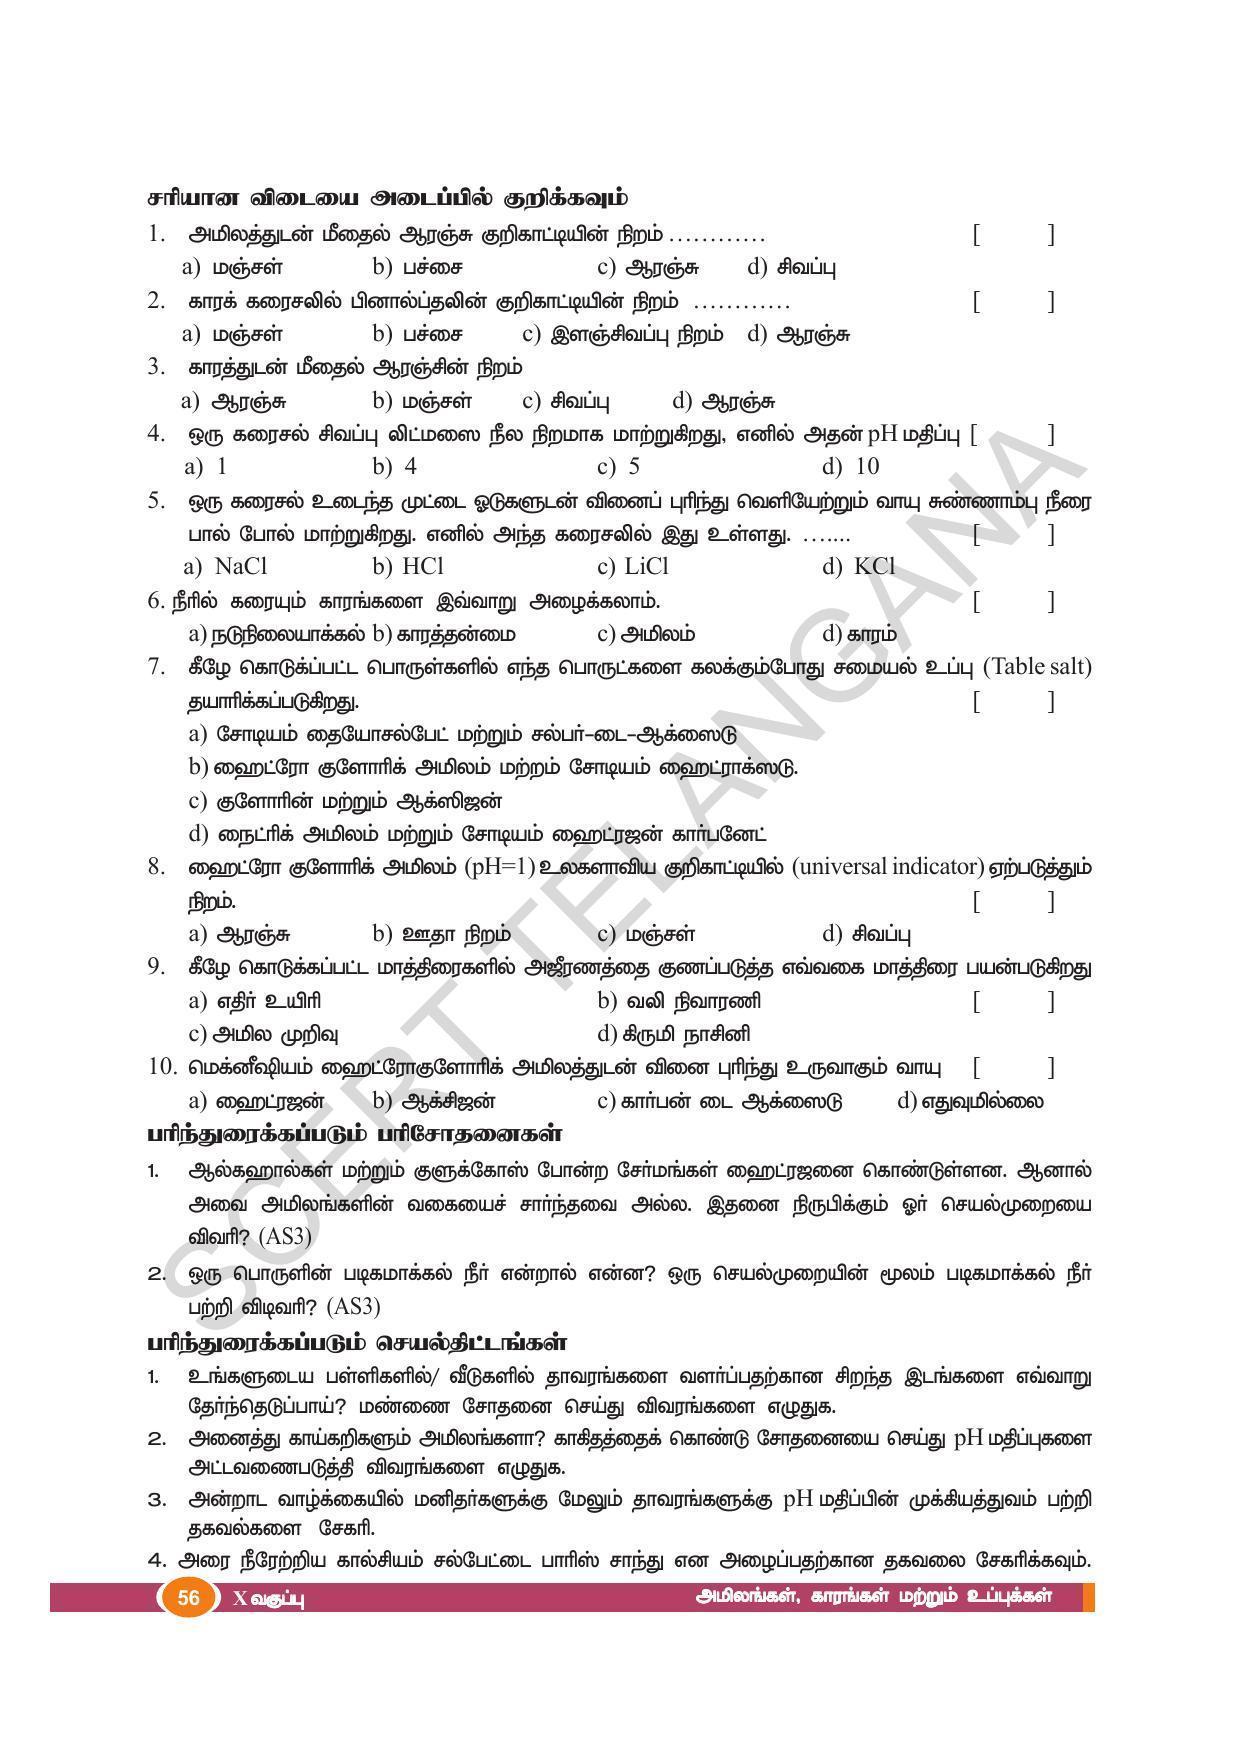 TS SCERT Class 10 Physical Science(Tamil Medium) Text Book - Page 68